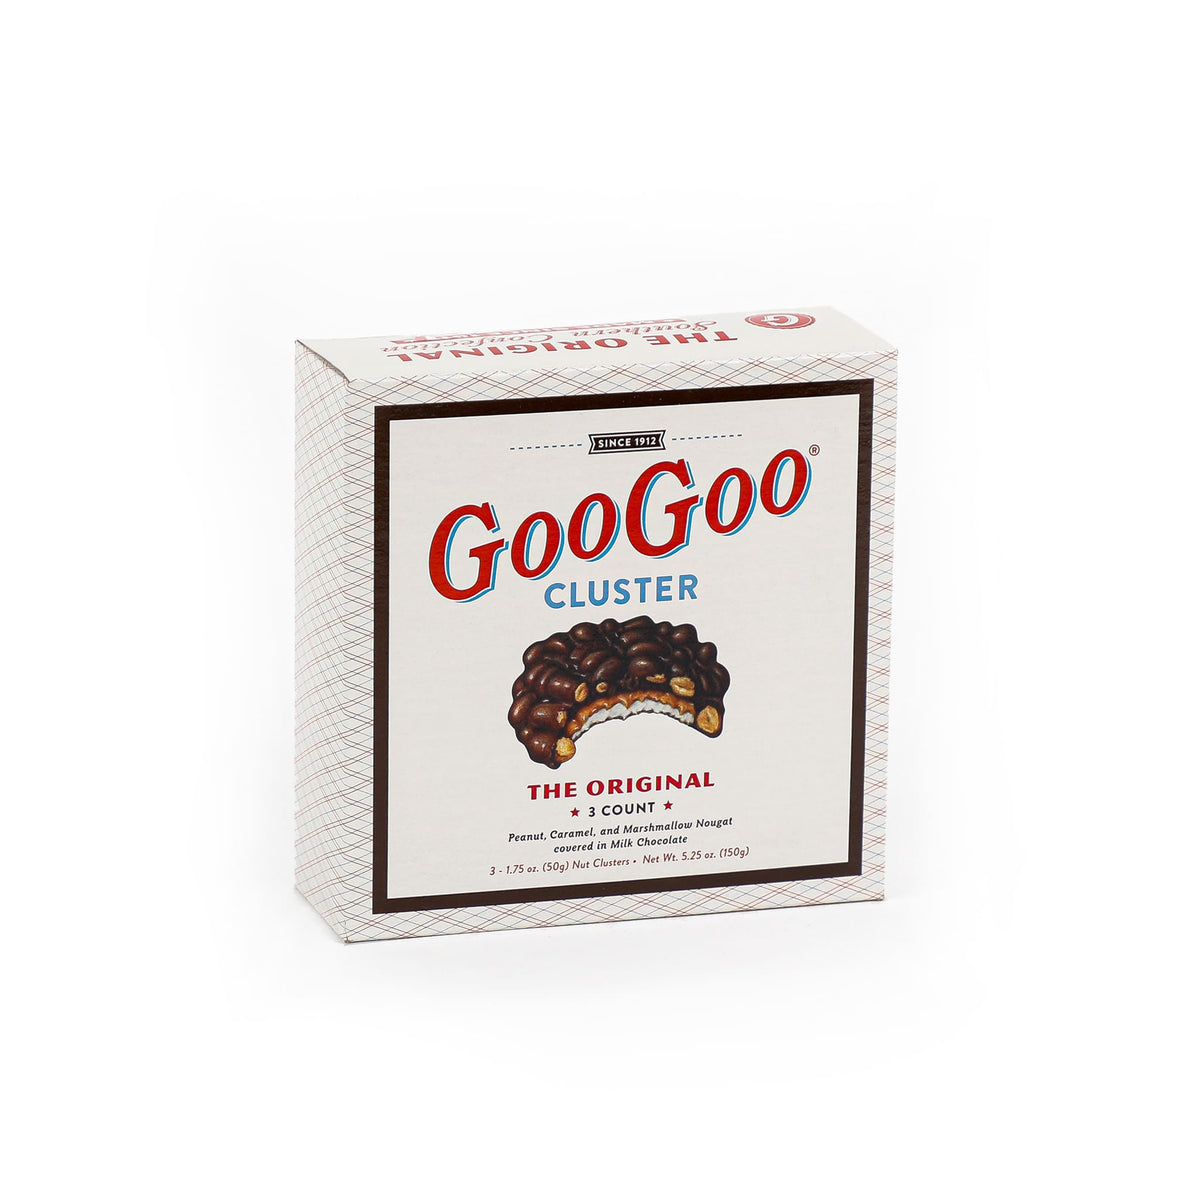 Goo Goo Cluster to transform downtown location with new storefront as part  of a $2 million investment - Nashville Business Journal